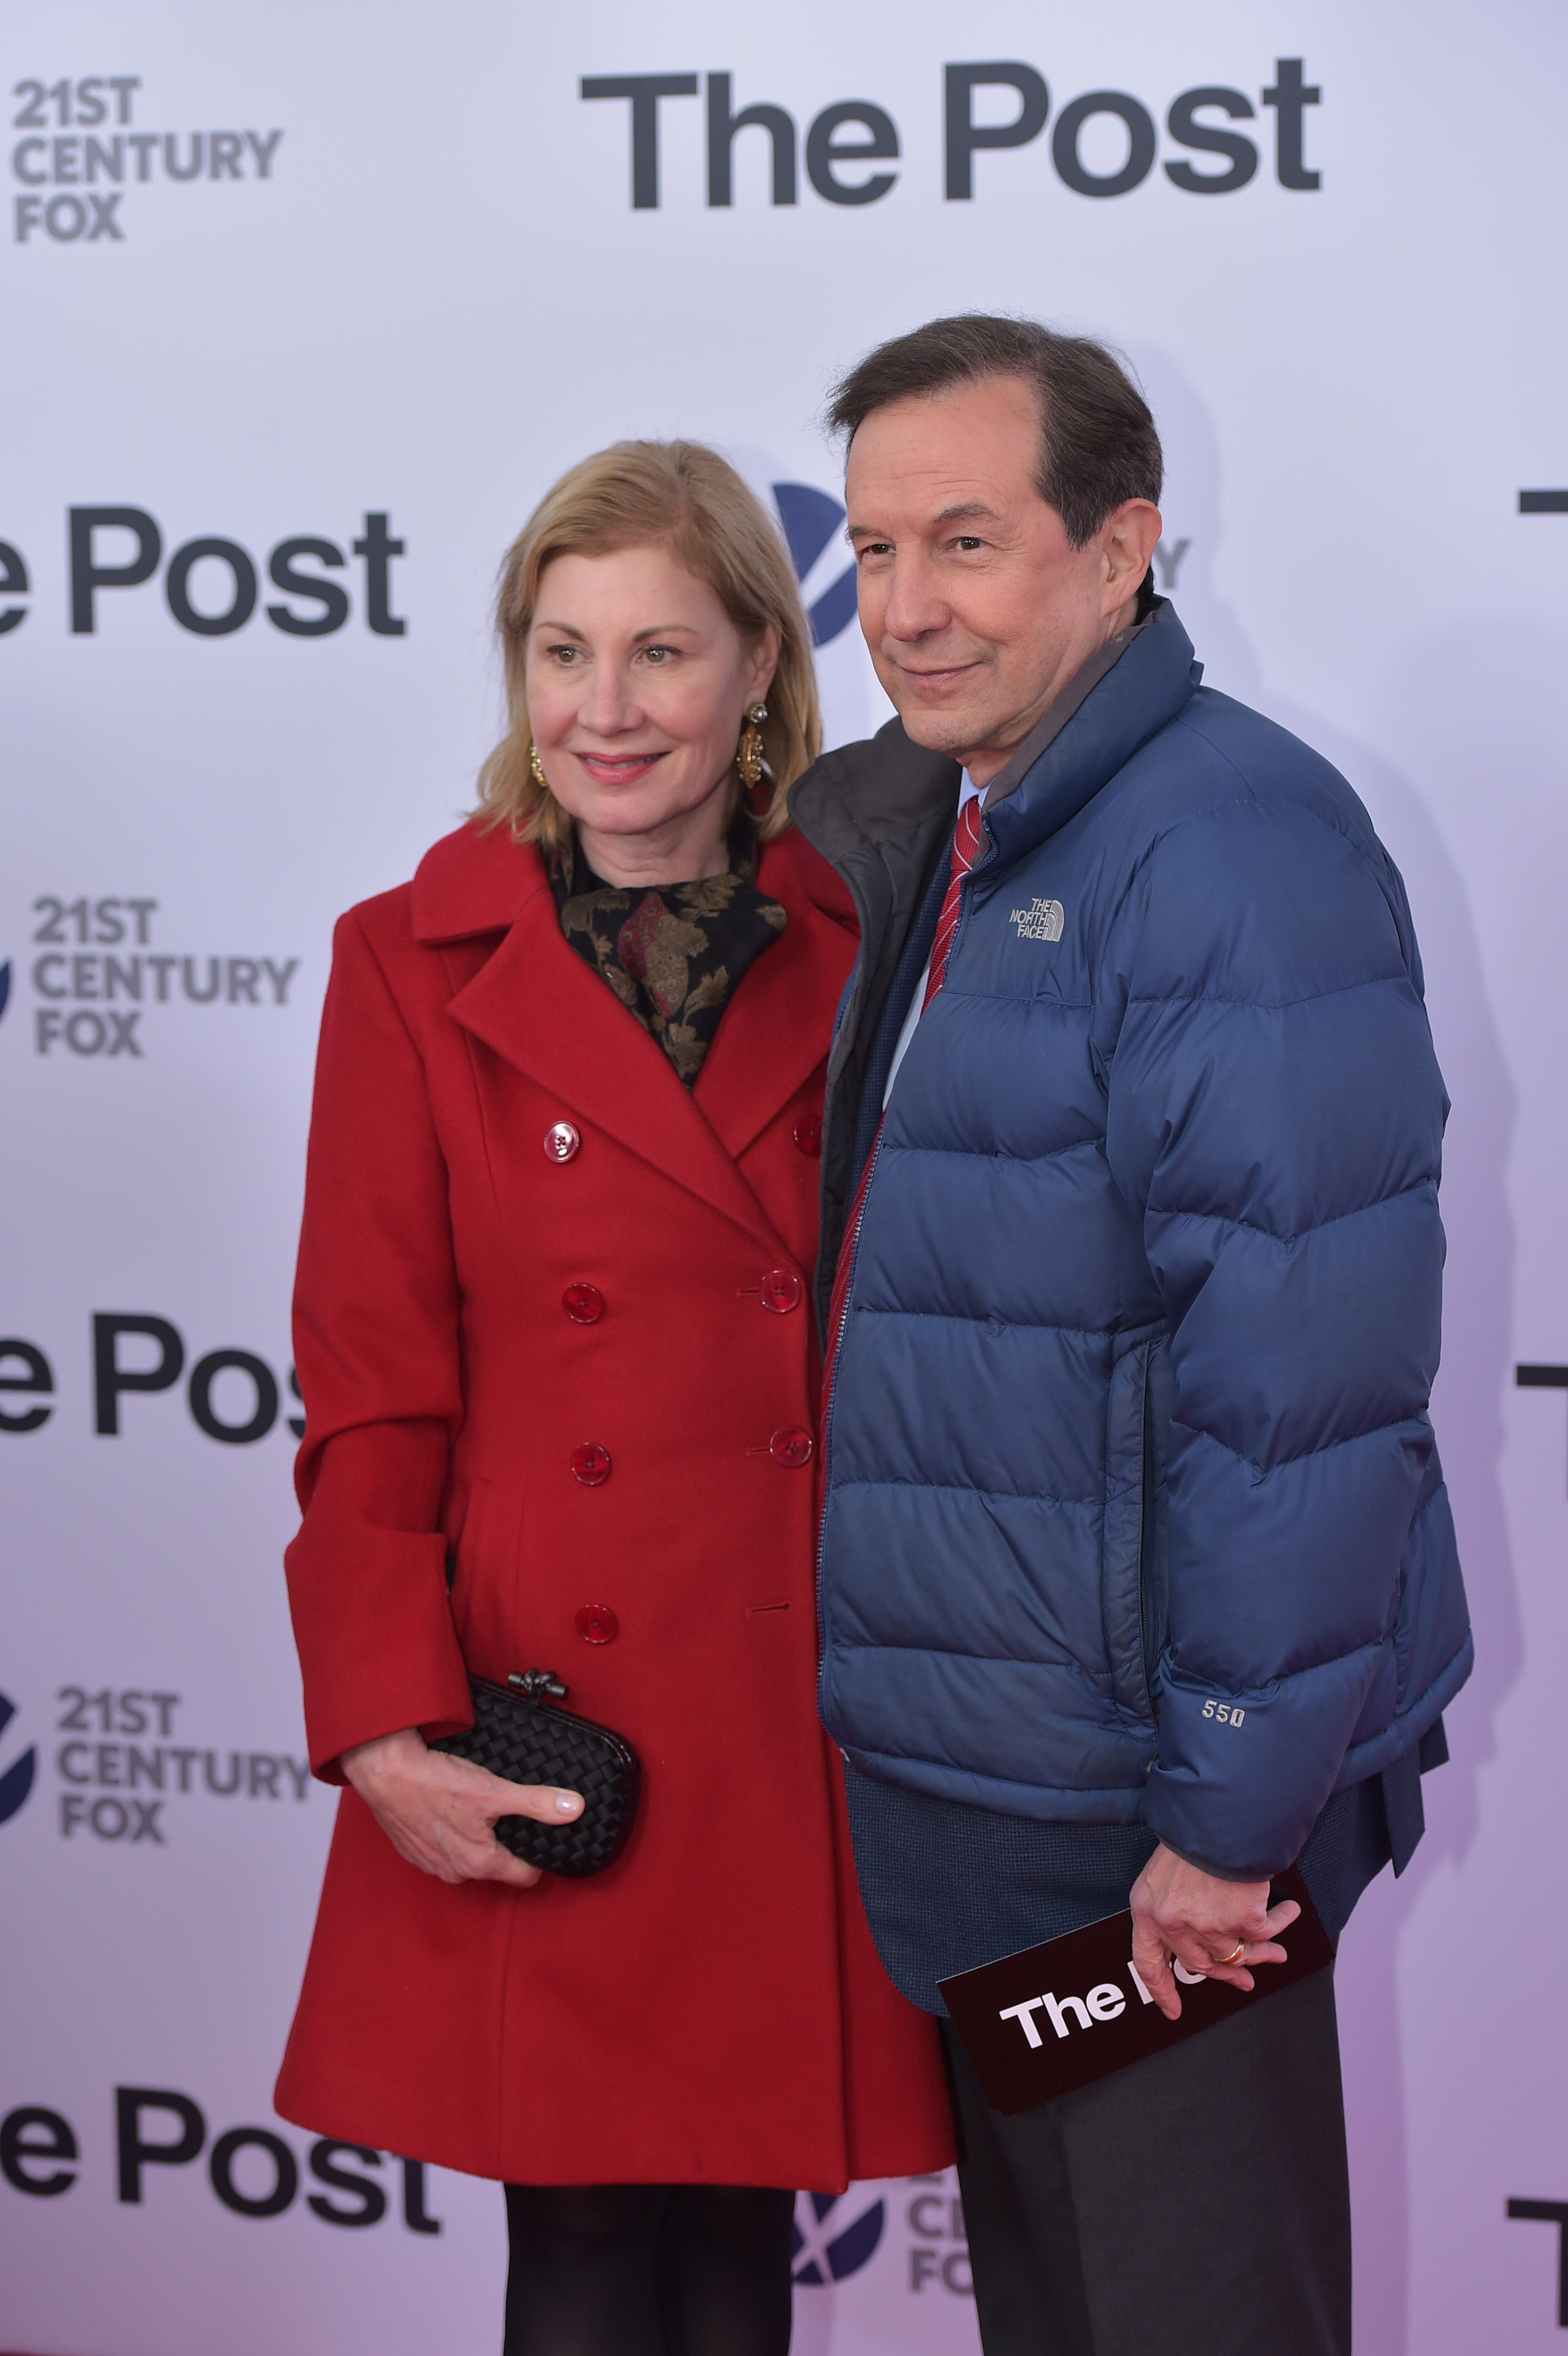 Chris Wallace and Lorraine Martin Smothers are pictured as they arrive for the premiere of "The Post" on December 14, 2017, in Washington, DC | Source: Getty Images